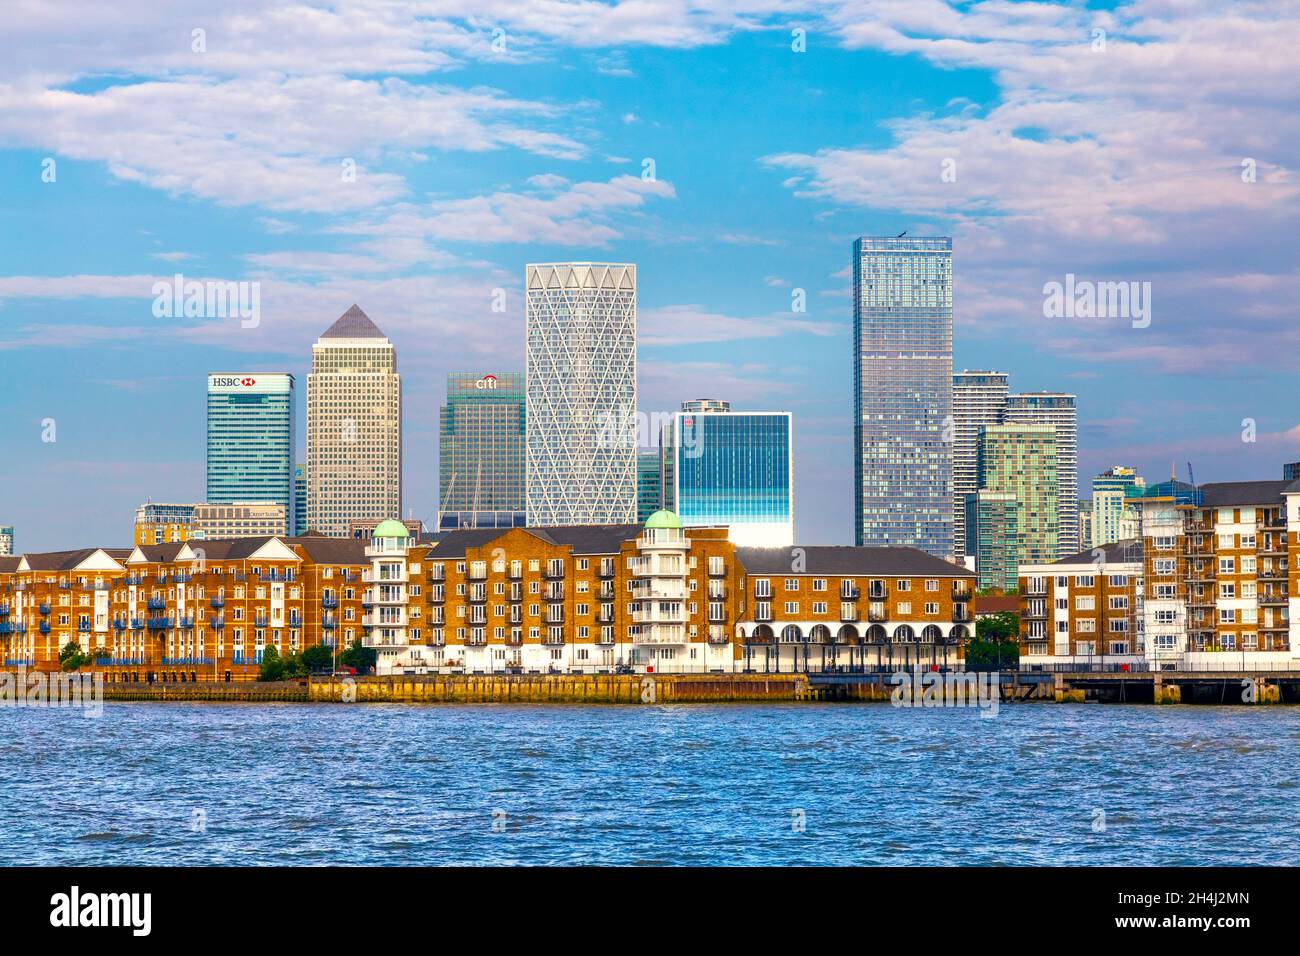 View of Rotherhithe and the Canary Wharf skyline, London, UK Stock Photo